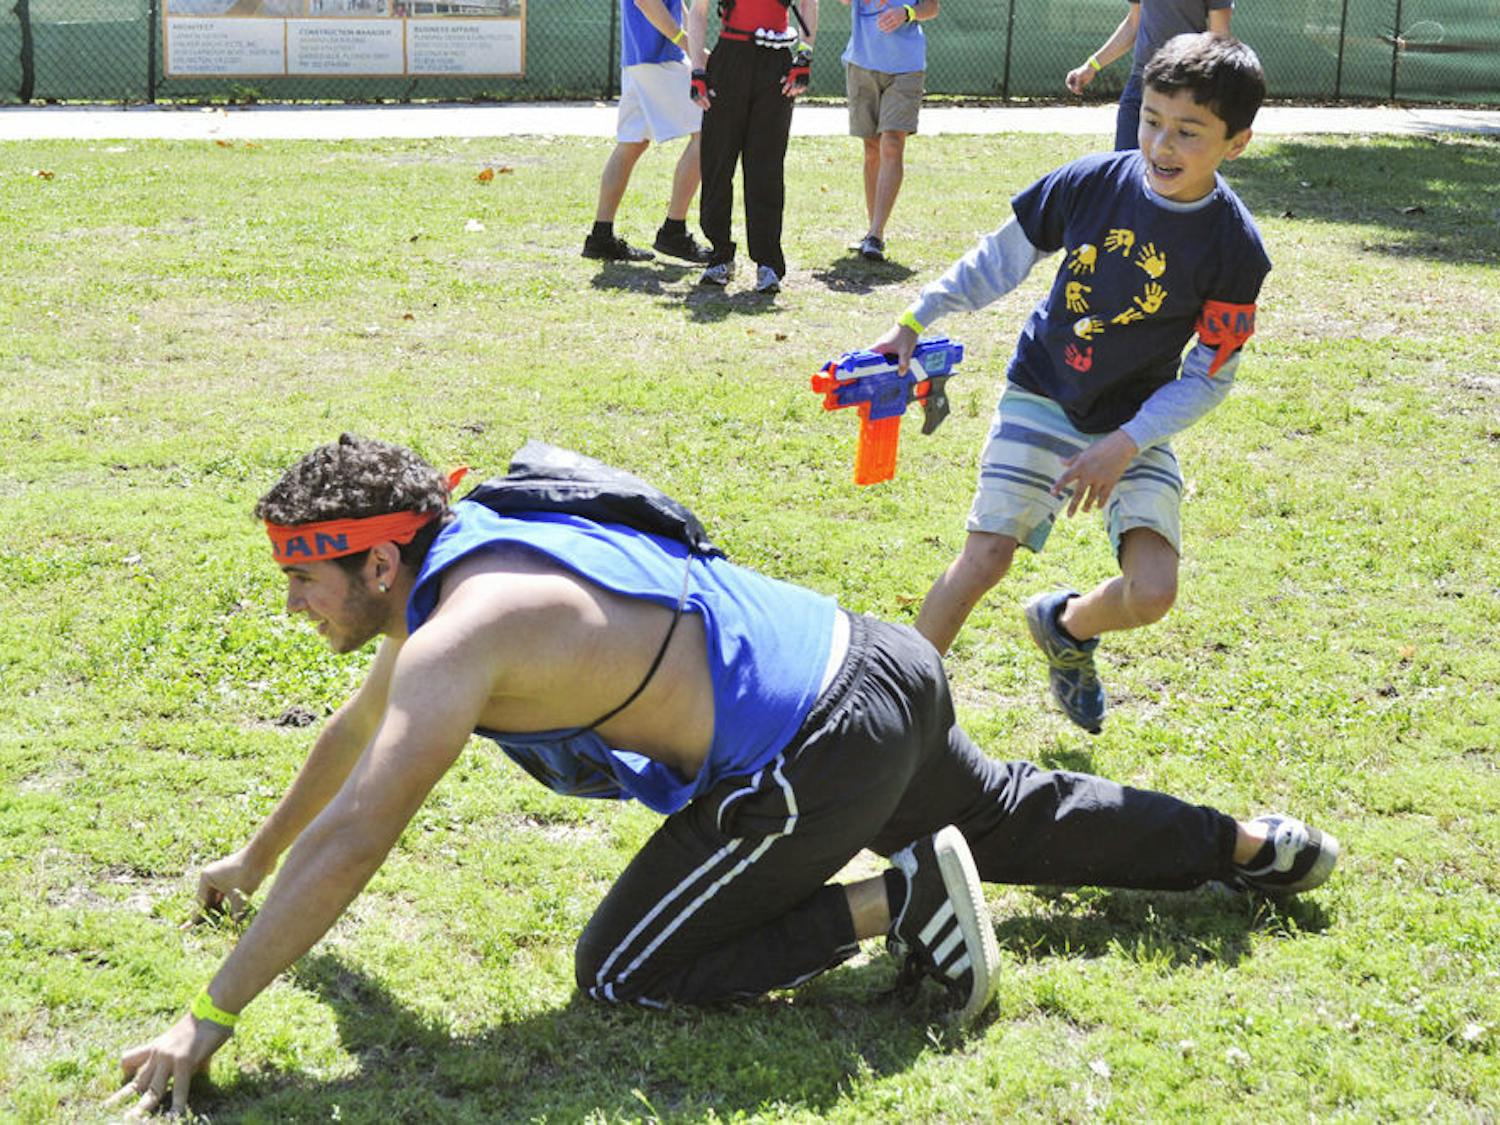 Nick Mullen, 12, chucks a sock at a zombie during a Humans vs. Zombies mini-mission for Children's Miracle Network Hospitals on the North Lawn on Saturday. Mullen was born with hypertrophic cardiomyopathy and has been treated at UF Health Children’s Hospital, where his mother, Jodi, is a pediatric nurse.